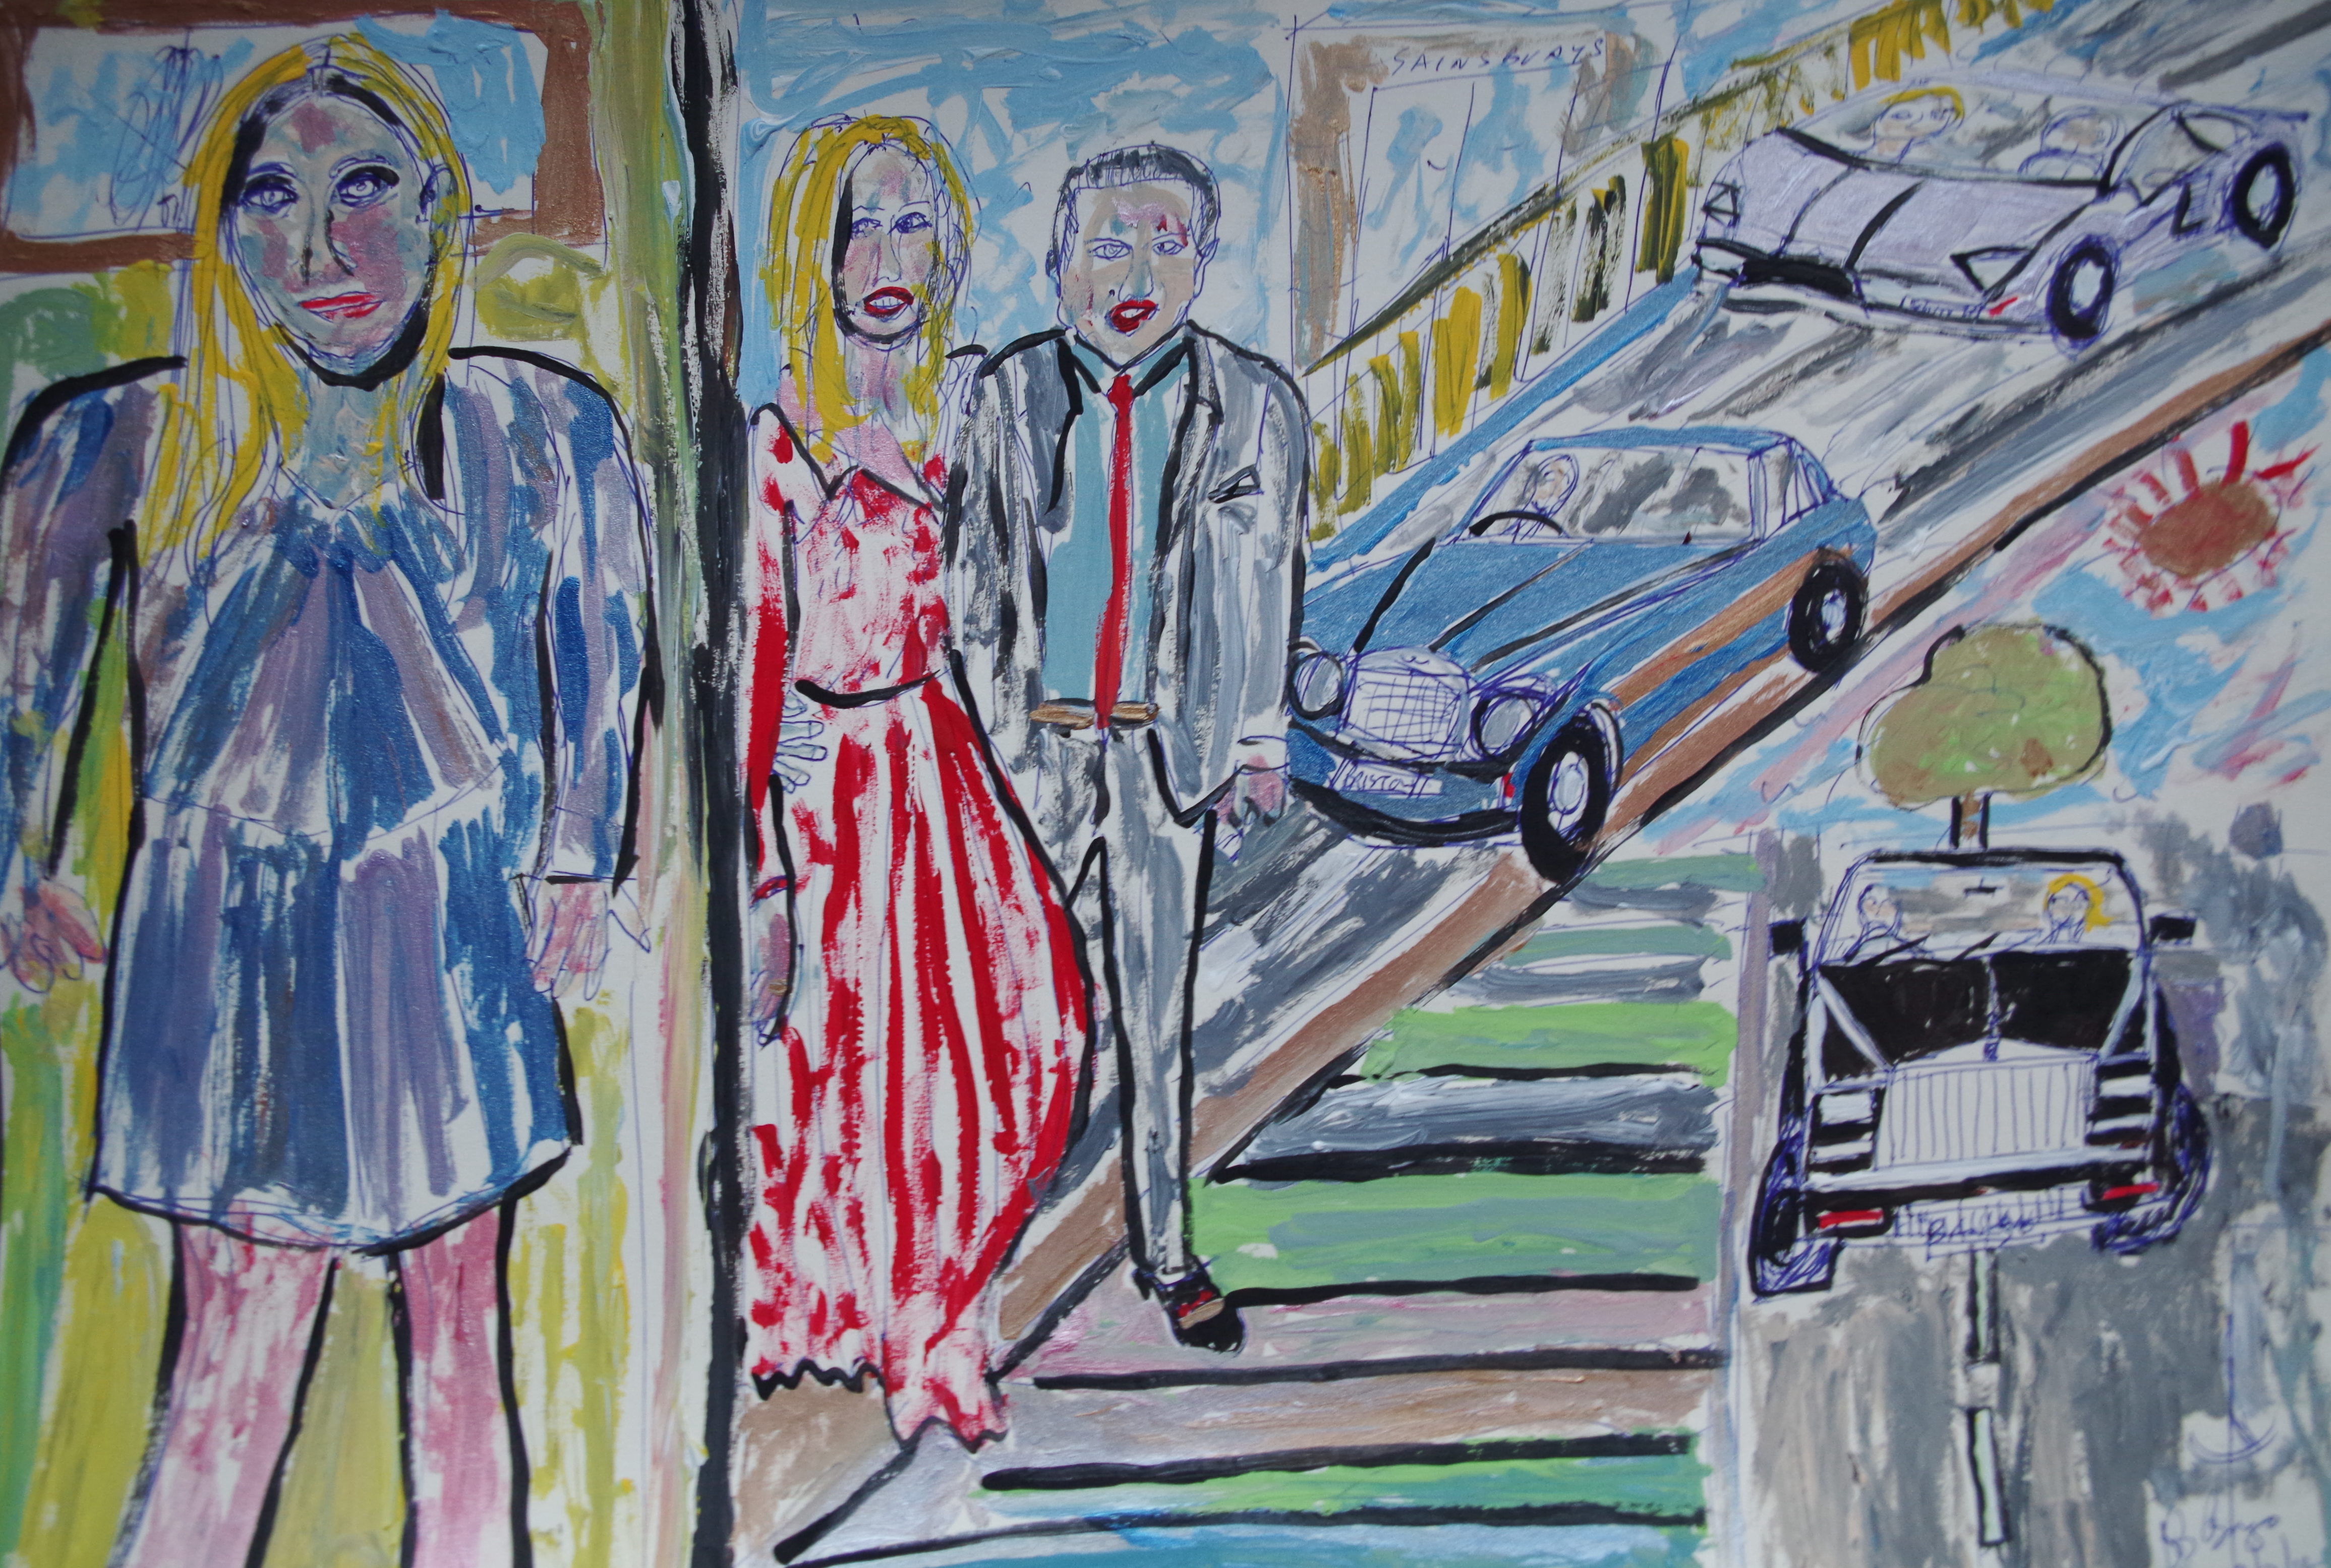 'Smart cars' by BB Bango A3 size acrylic on paper. Sold to art collector in UK